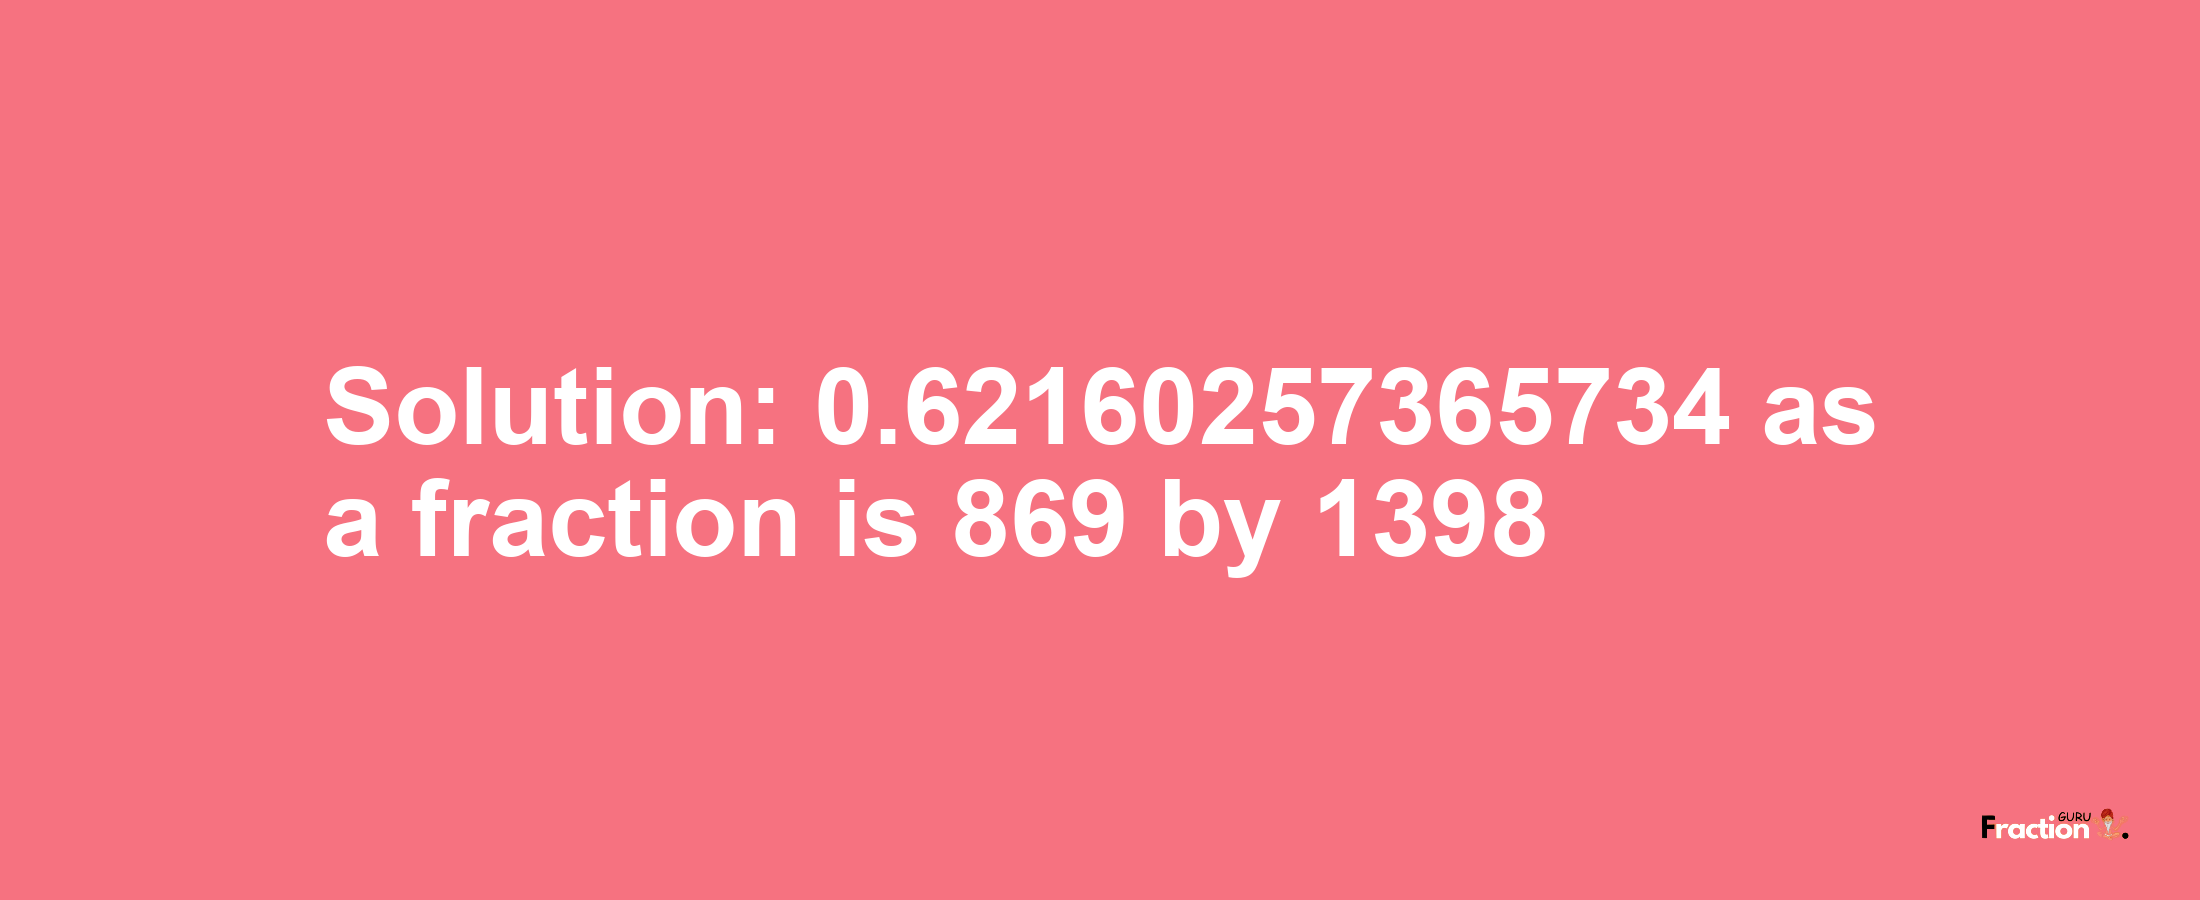 Solution:0.62160257365734 as a fraction is 869/1398